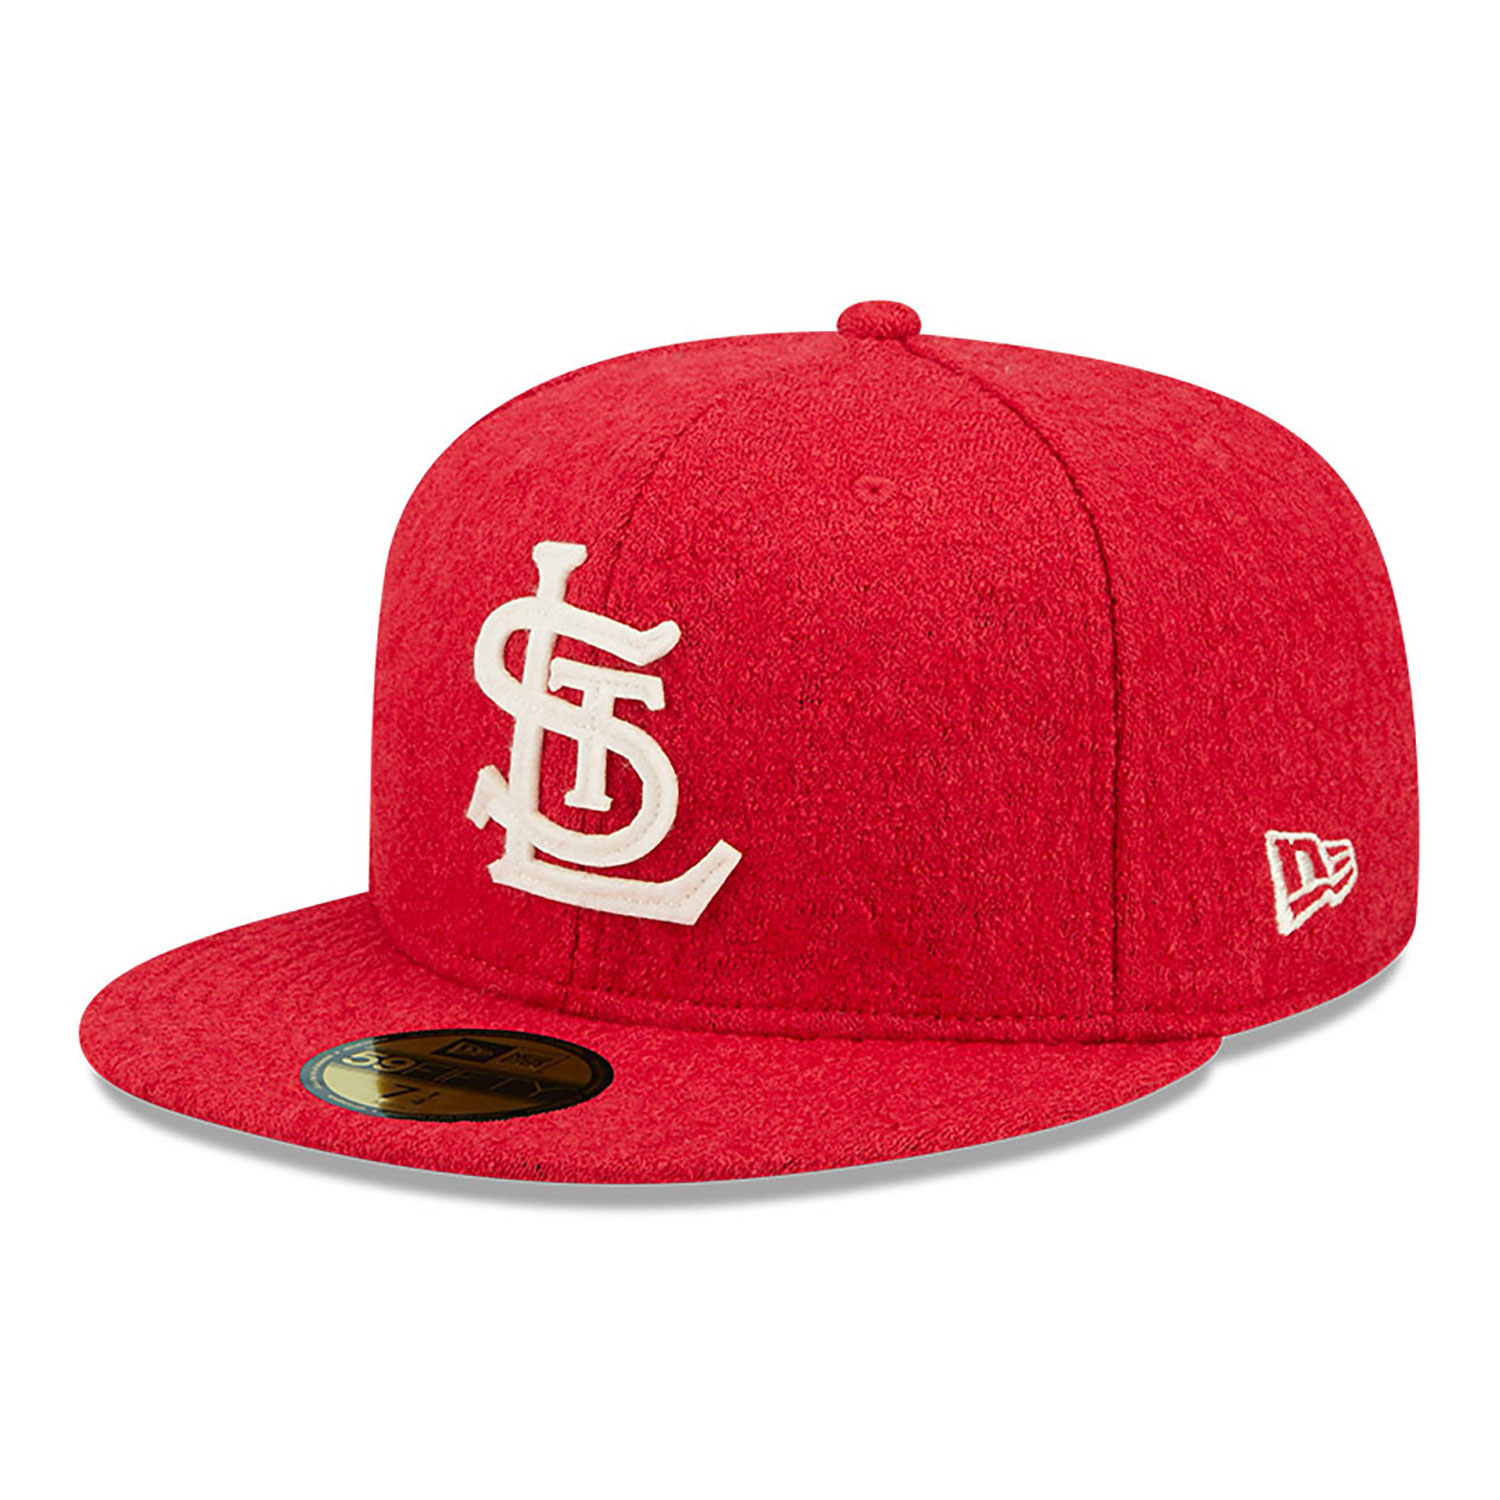 St. Louis Cardinals MLB Cooperstown Red 59FIFTY Fitted Cap